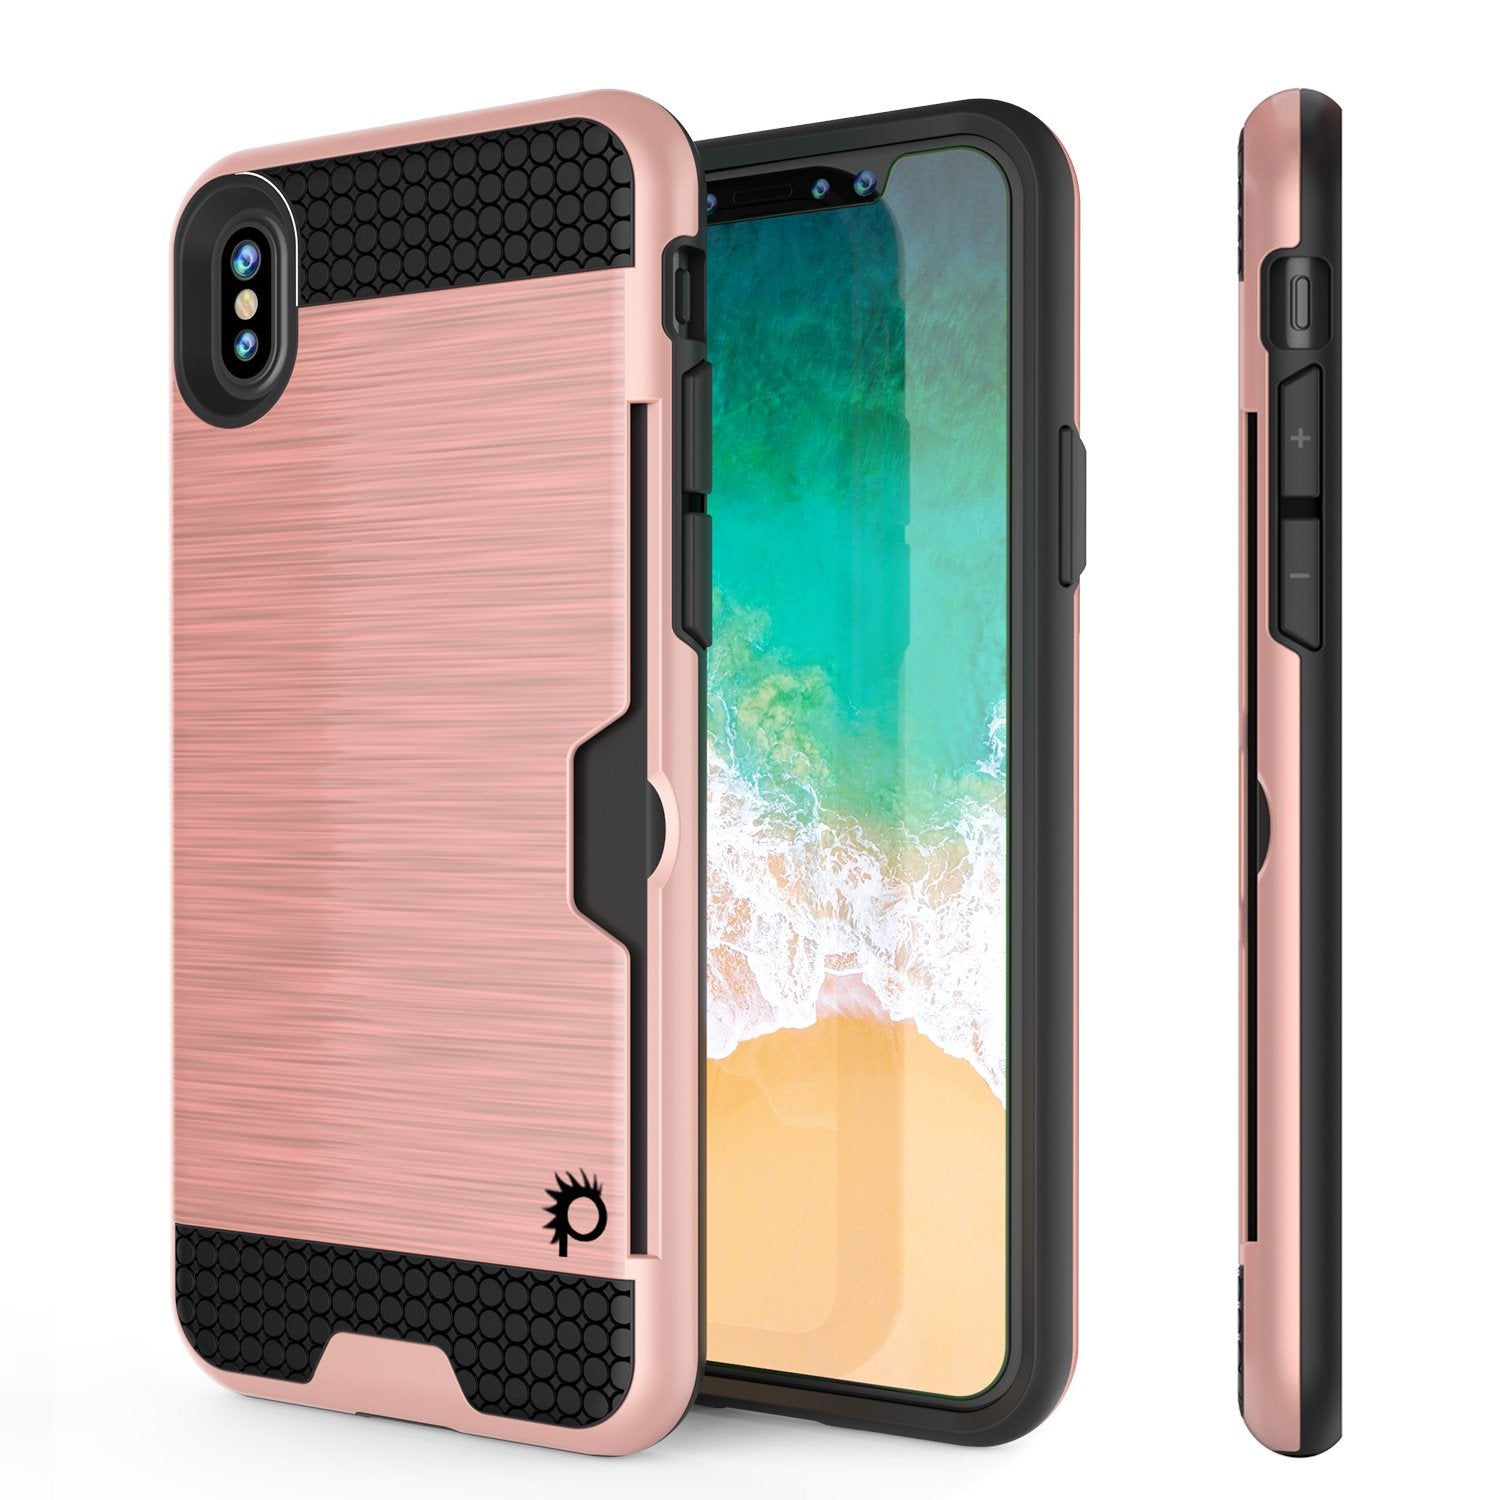 iPhone X Case, PUNKcase [SLOT Series] Slim Fit Dual-Layer Armor Cover & Tempered Glass PUNKSHIELD Screen Protector for Apple iPhone X [Rose Gold]